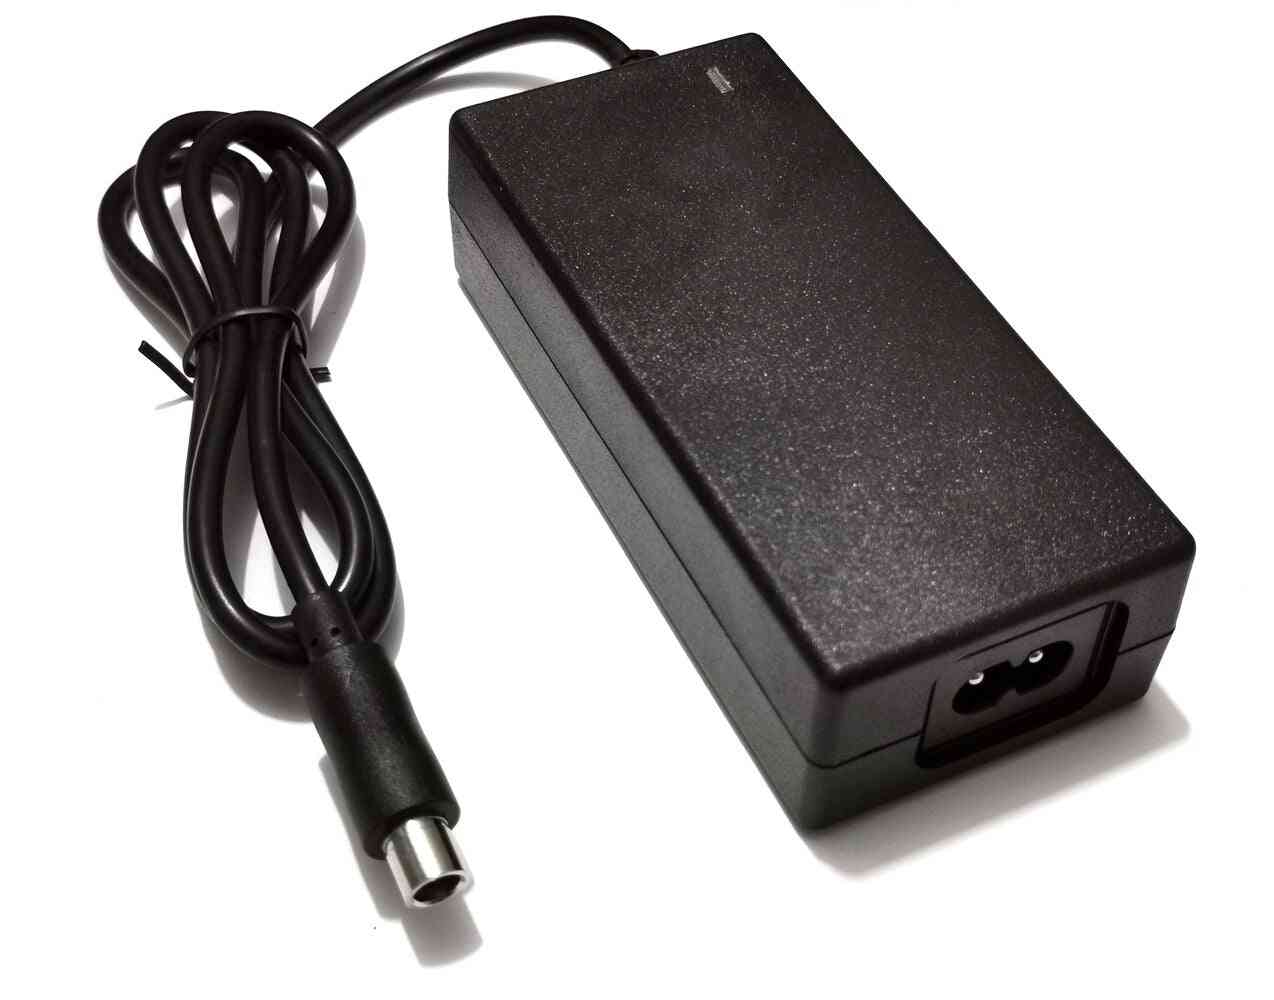 Battery Charger, Power Supply Adapters, Electric Scooter Accessories